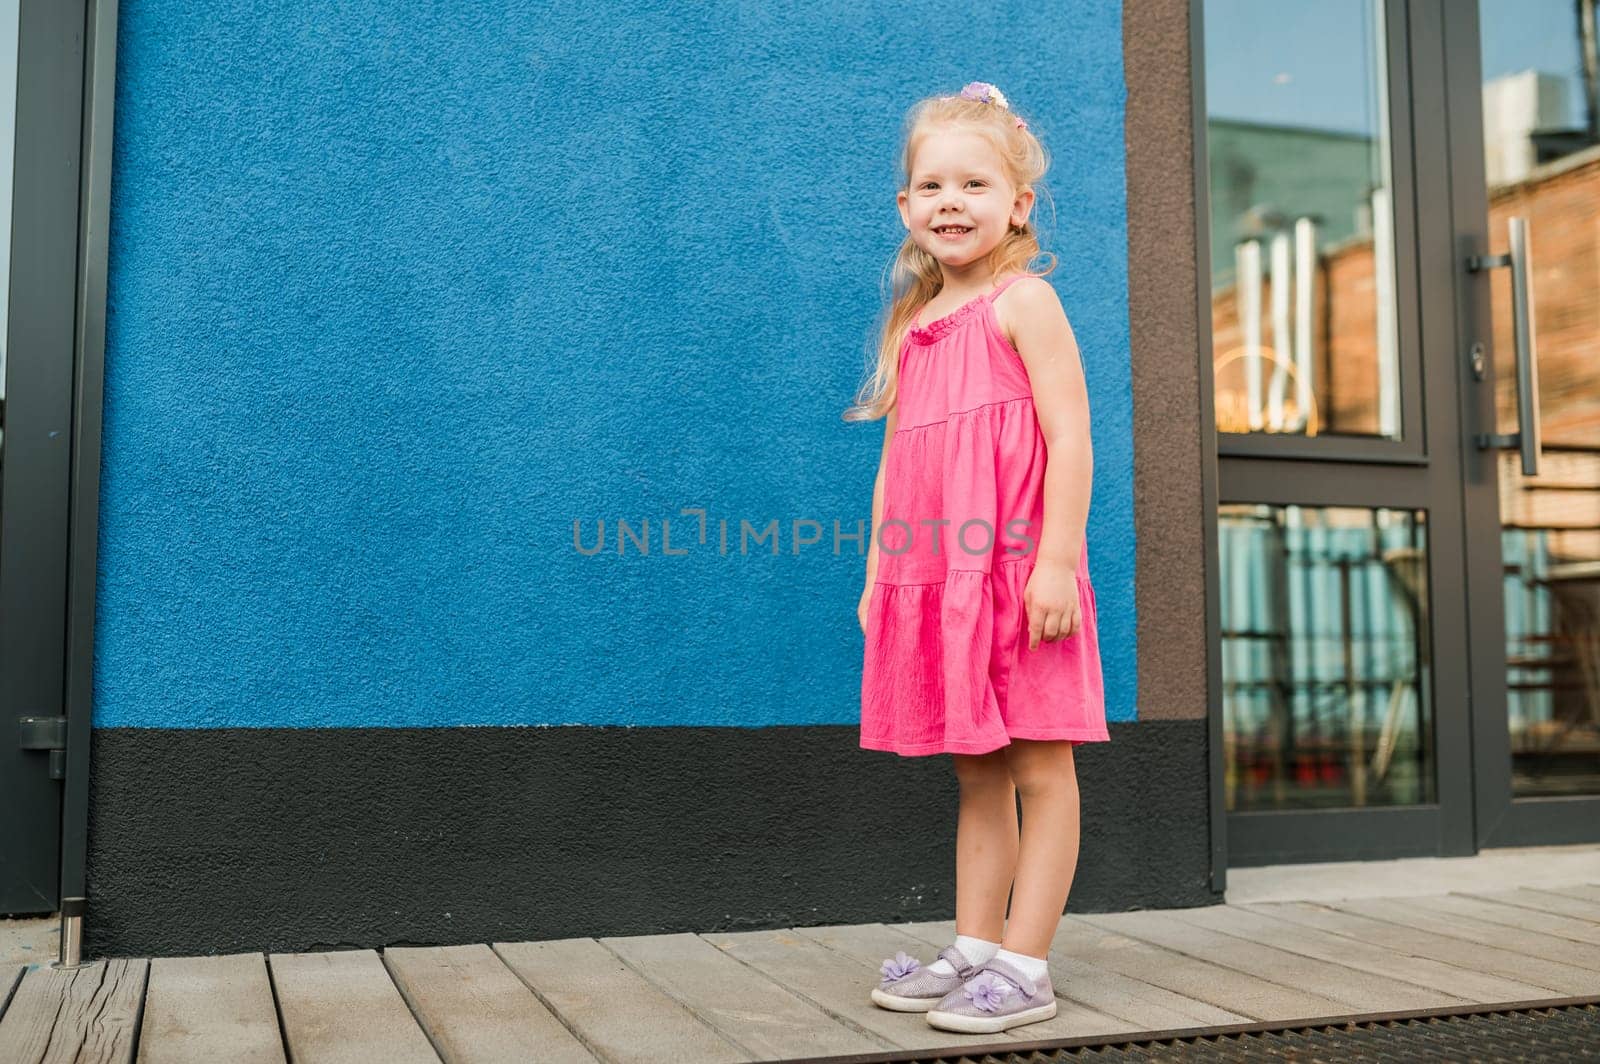 Child girl with hearing aids and cochlear implants having fun outdoor speak and playing. Copy space and empty place for advertising.